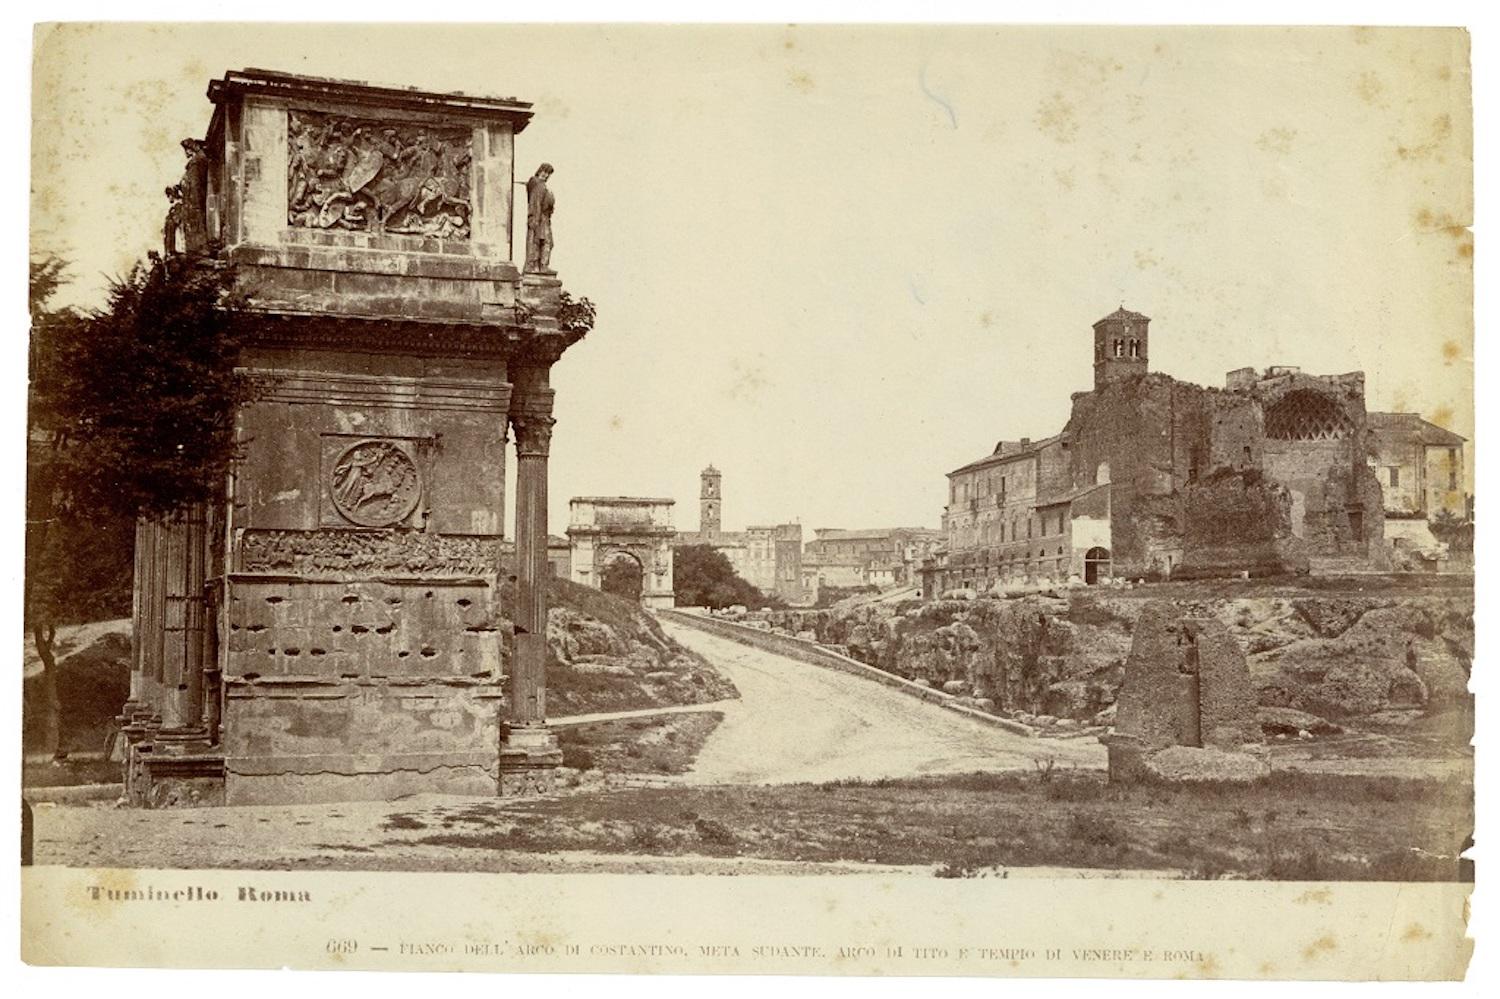 Views of Ancient Rome - Collection of 18 Vintage Albumen Prints - 1880/90 - Photograph by Lodovico Tuminello